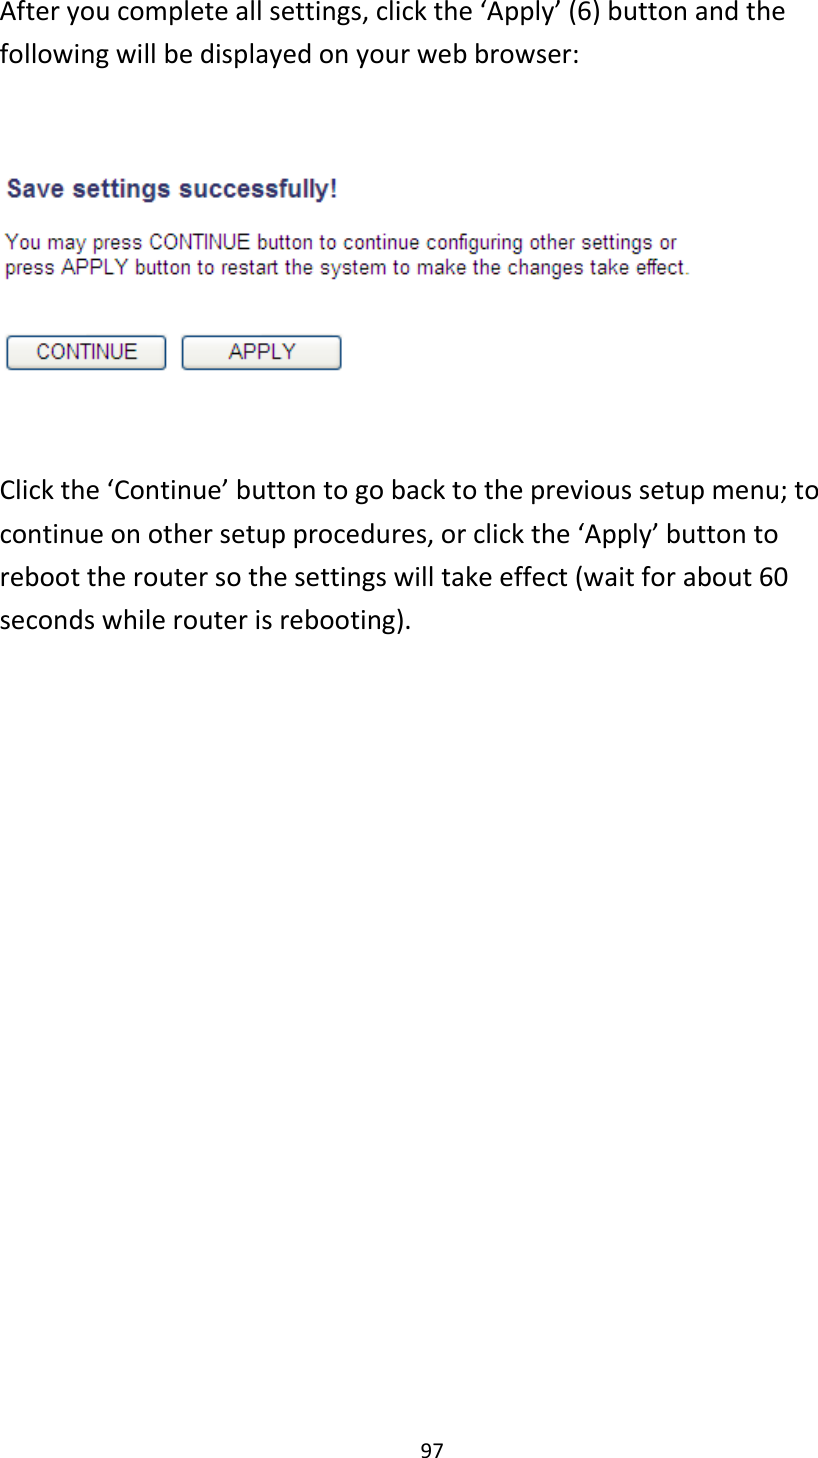 97 After you complete all settings, click the ‘Apply’ (6) button and the following will be displayed on your web browser:    Click the ‘Continue’ button to go back to the previous setup menu; to continue on other setup procedures, or click the ‘Apply’ button to reboot the router so the settings will take effect (wait for about 60 seconds while router is rebooting).   